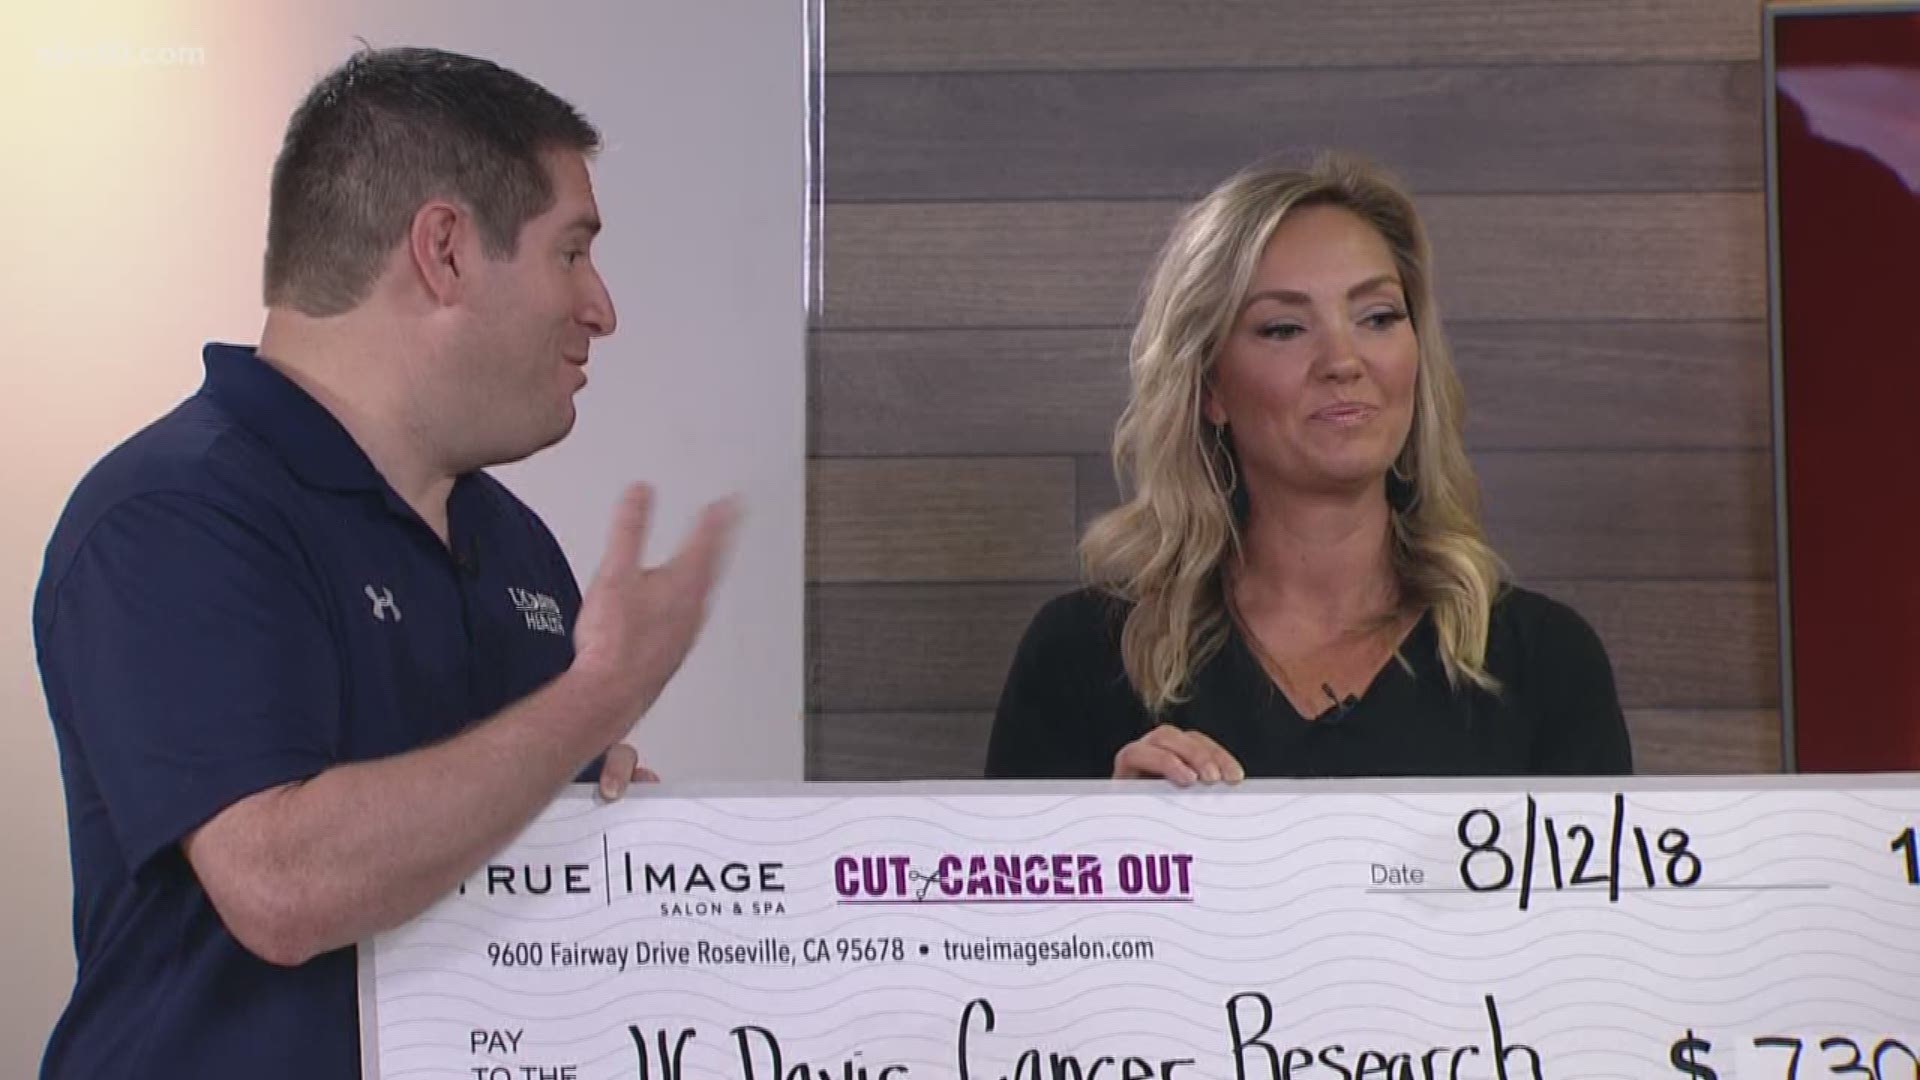 True Image Salon & Spa in Roseville raises money for the UC Davis Comprehensive Cancer Center. They're holding a fundraiser called Cut Cancer Out, on Sunday, August 12, 2018.